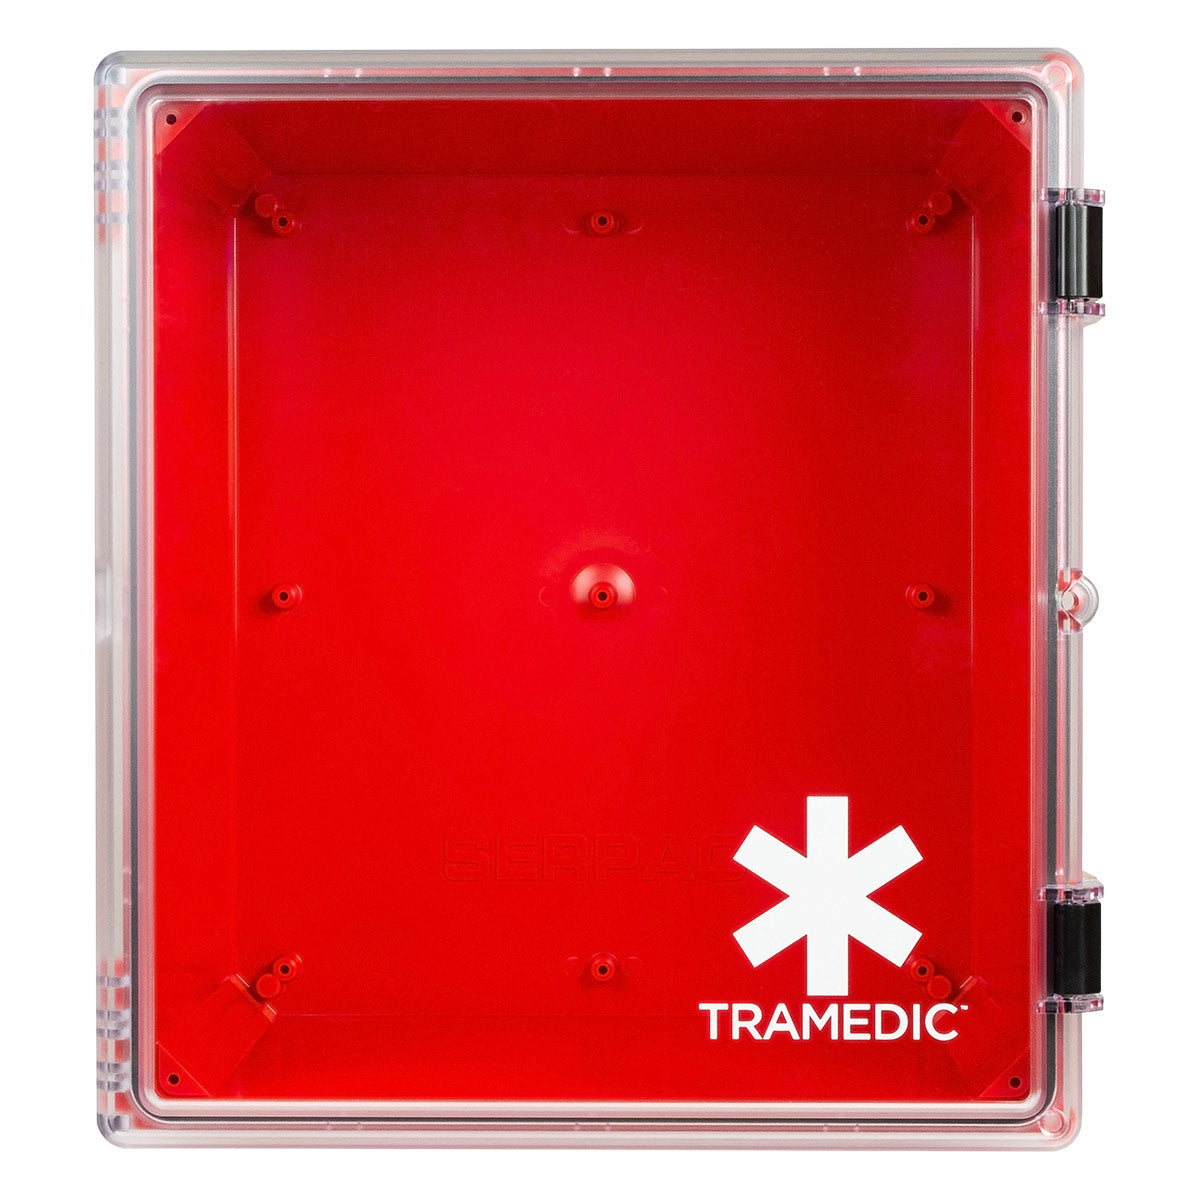 Tramedic® Polycarbonate Case for Bleeding Control Stations